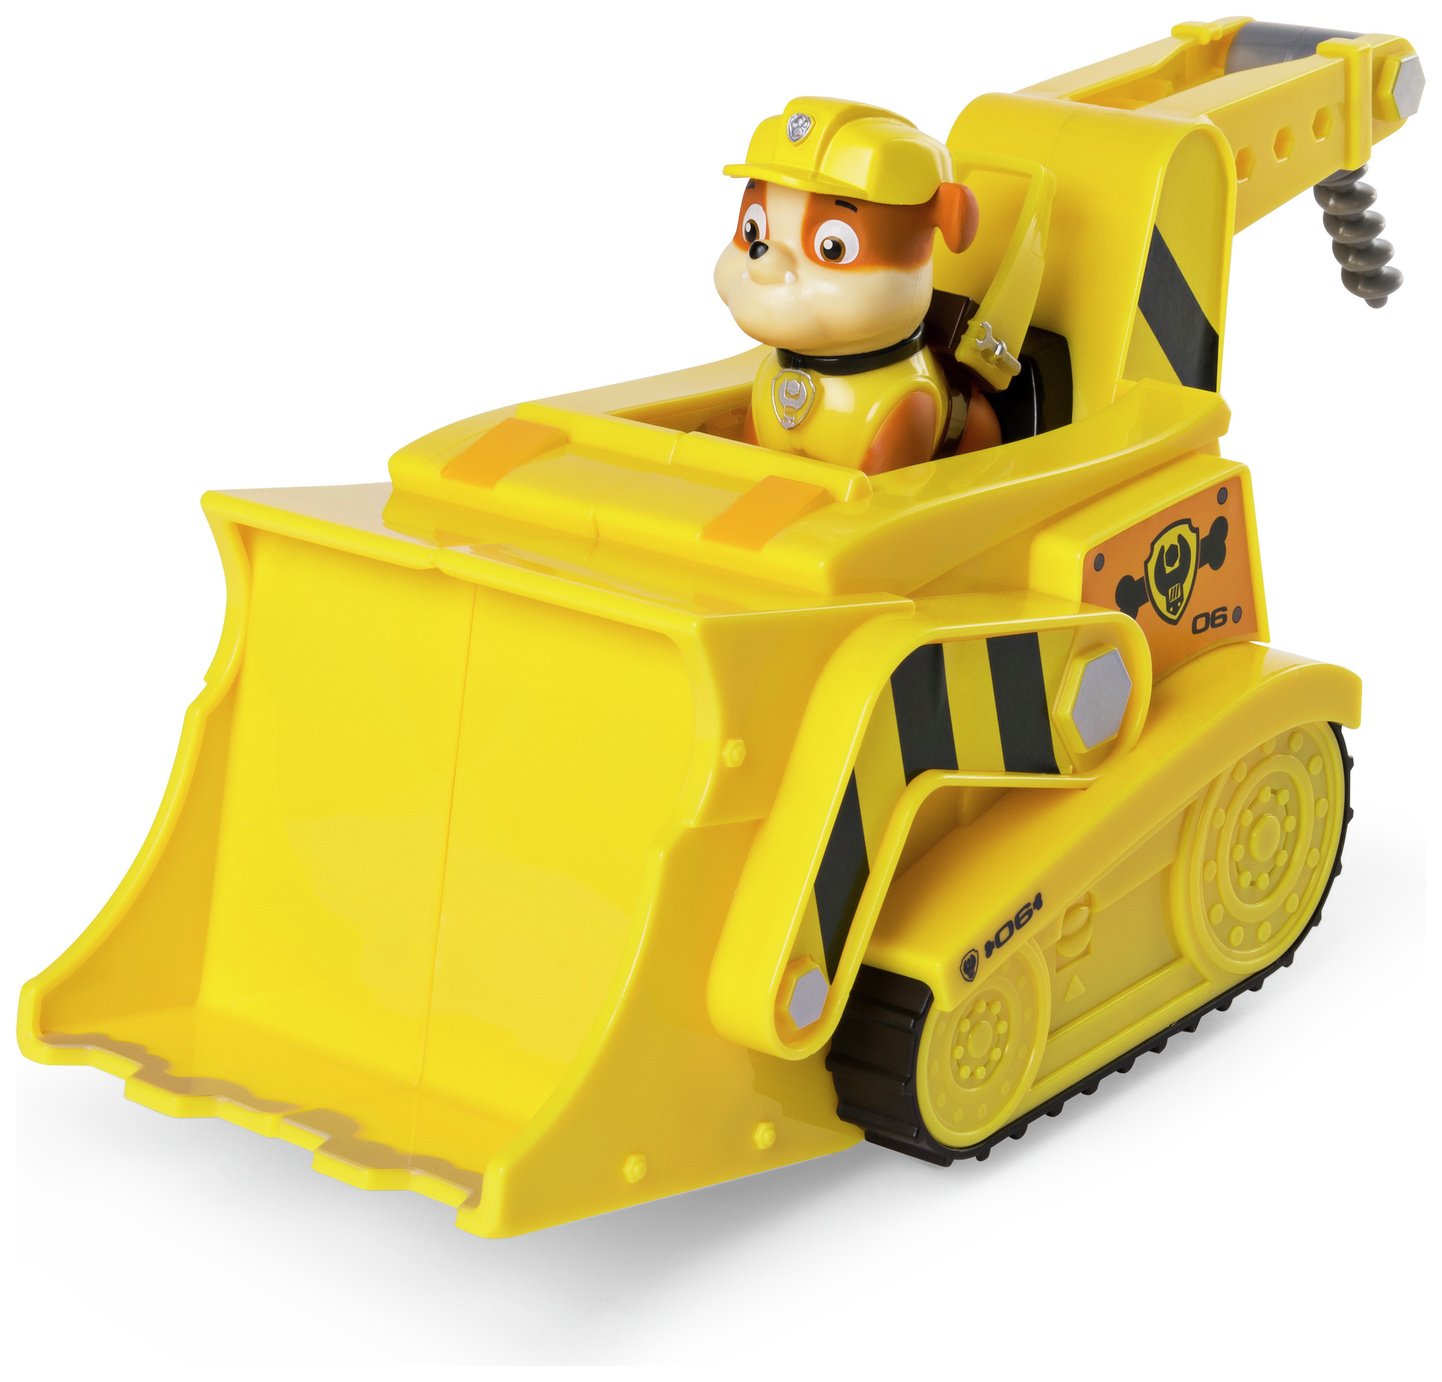 PAW Patrol Rubble Flip & Fly Transforming Vehicle Review